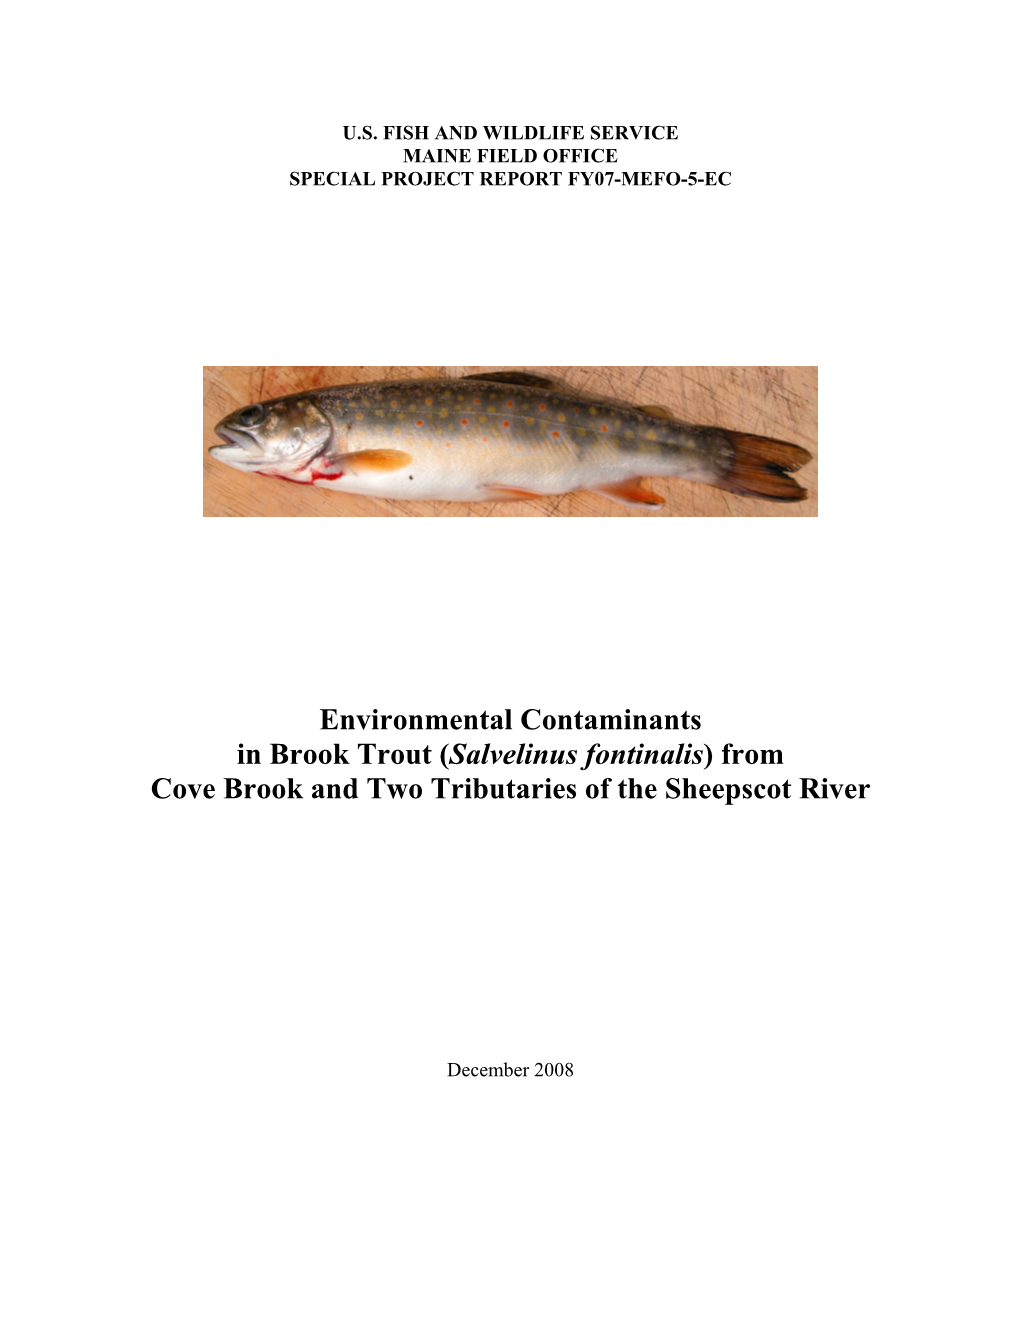 From Cove Brook and Two Tributaries of the Sheepscot River